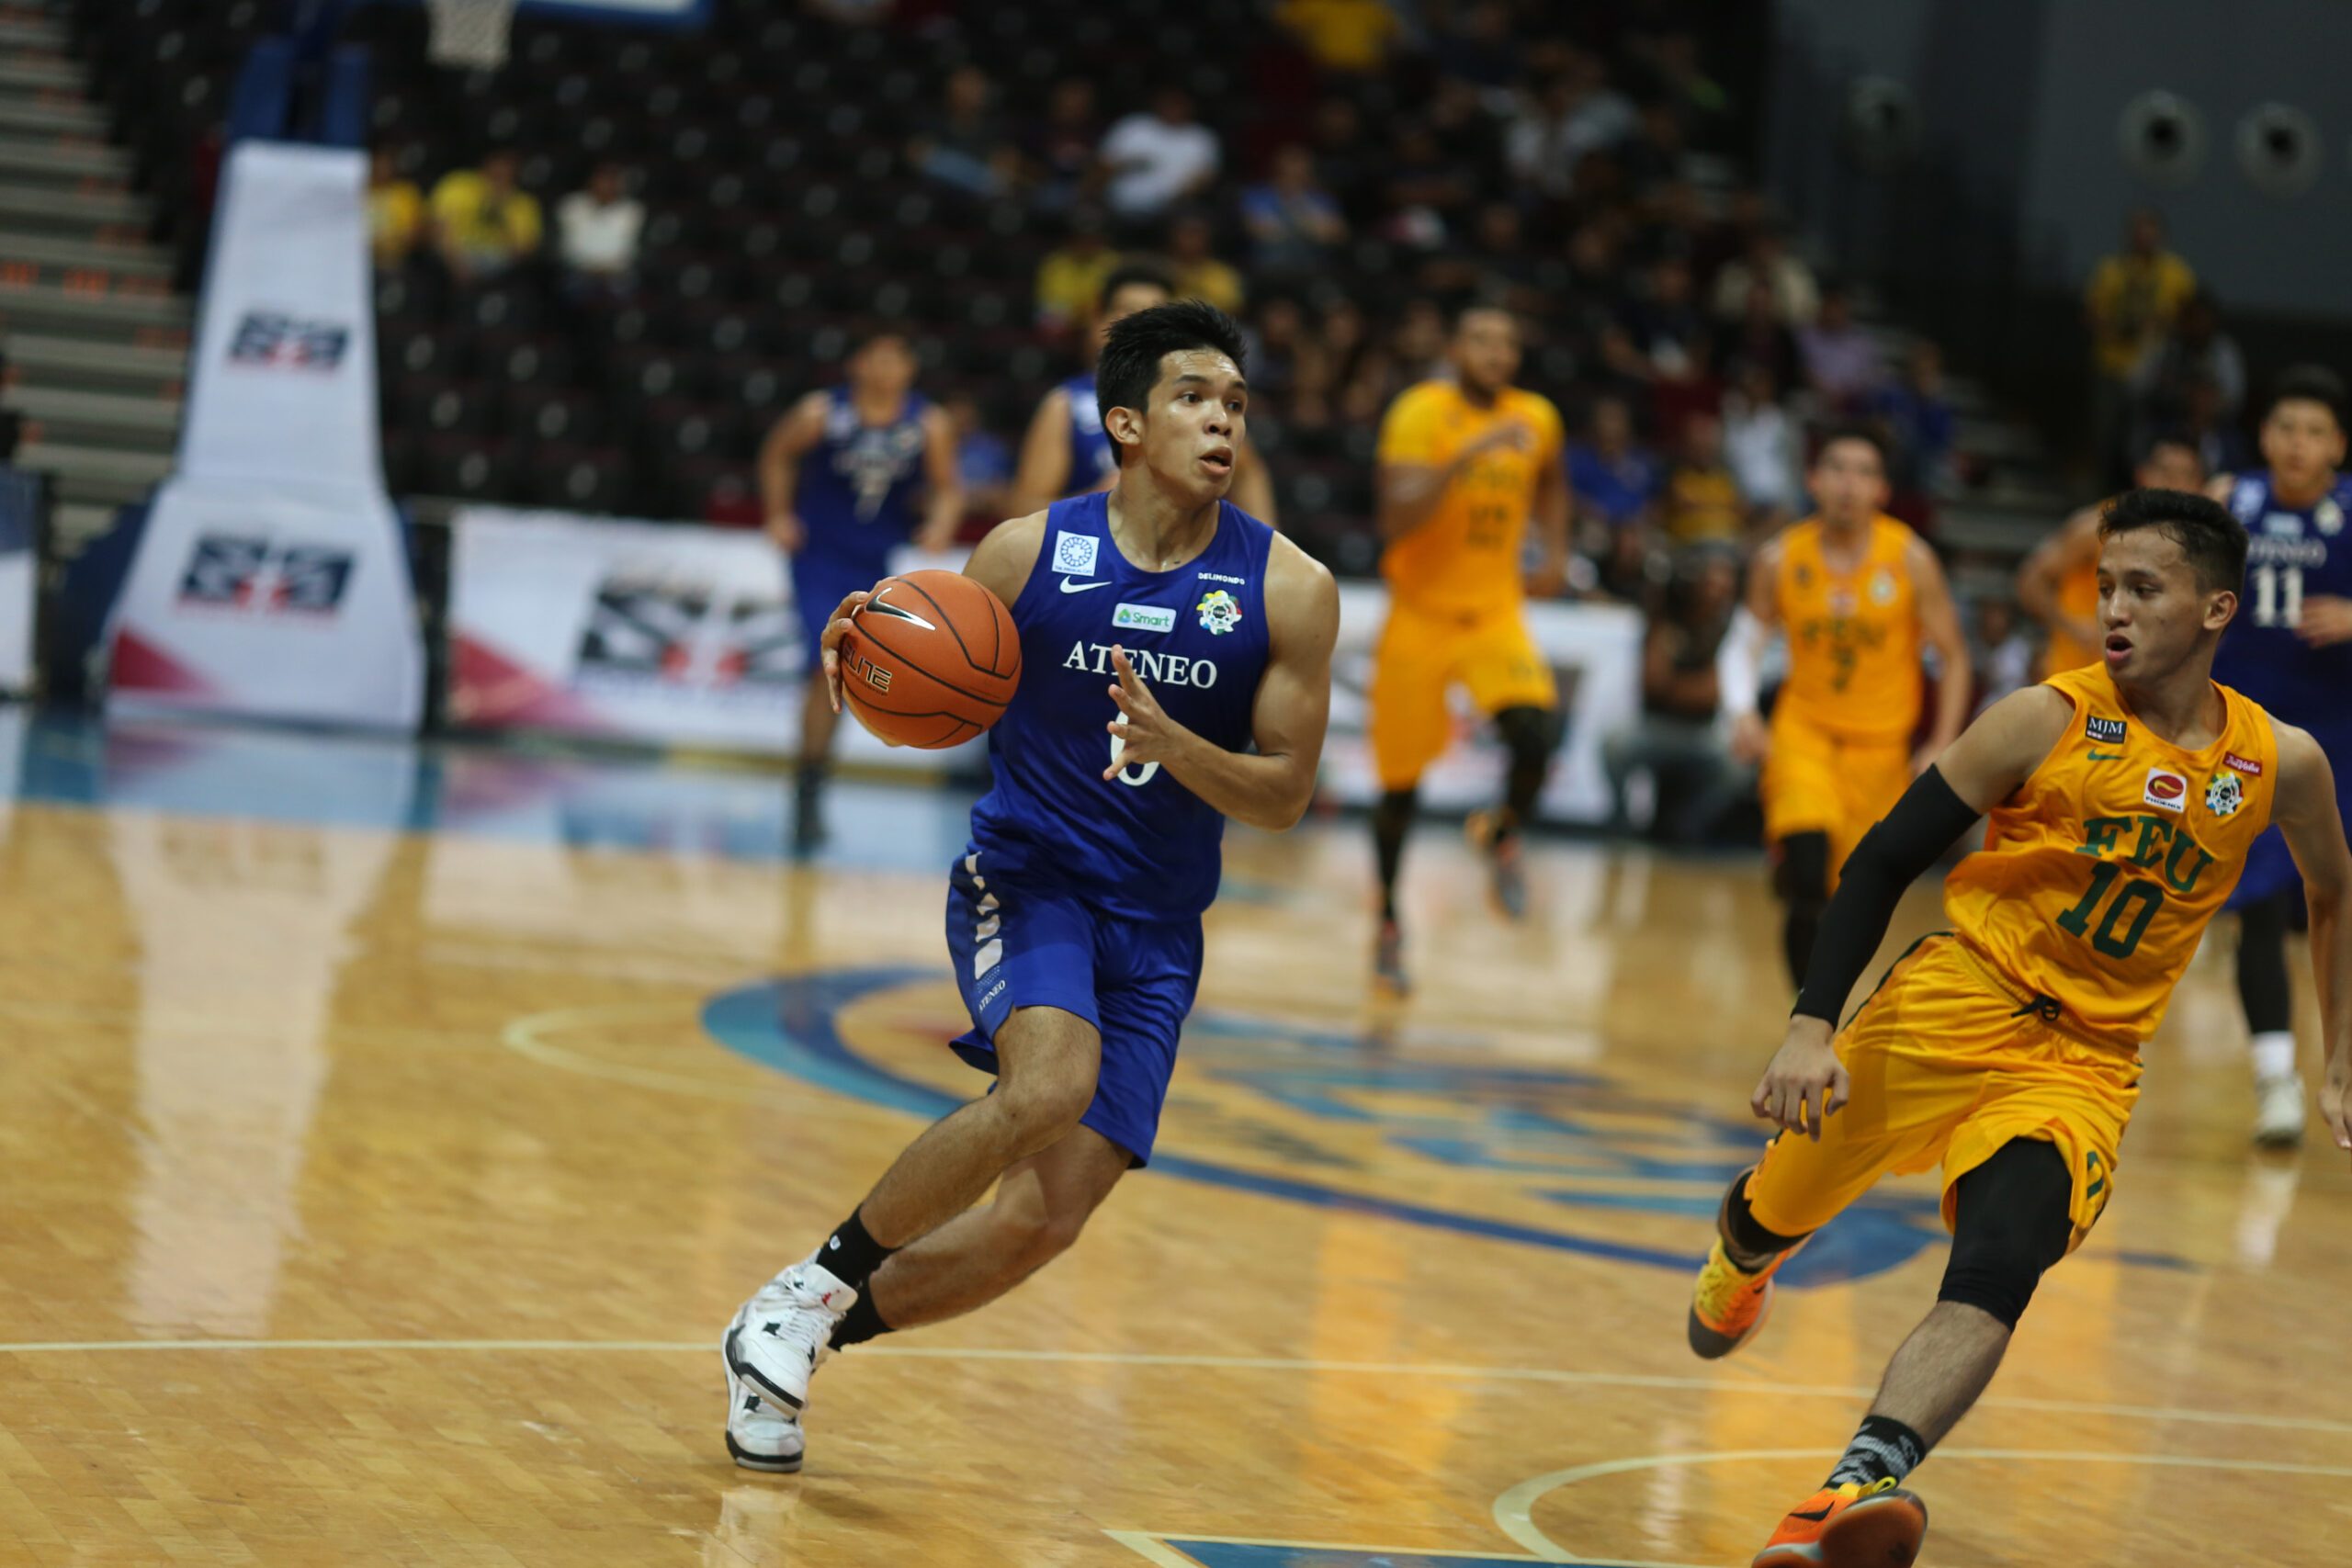 Ateneo holds on late to defeat defending champion FEU